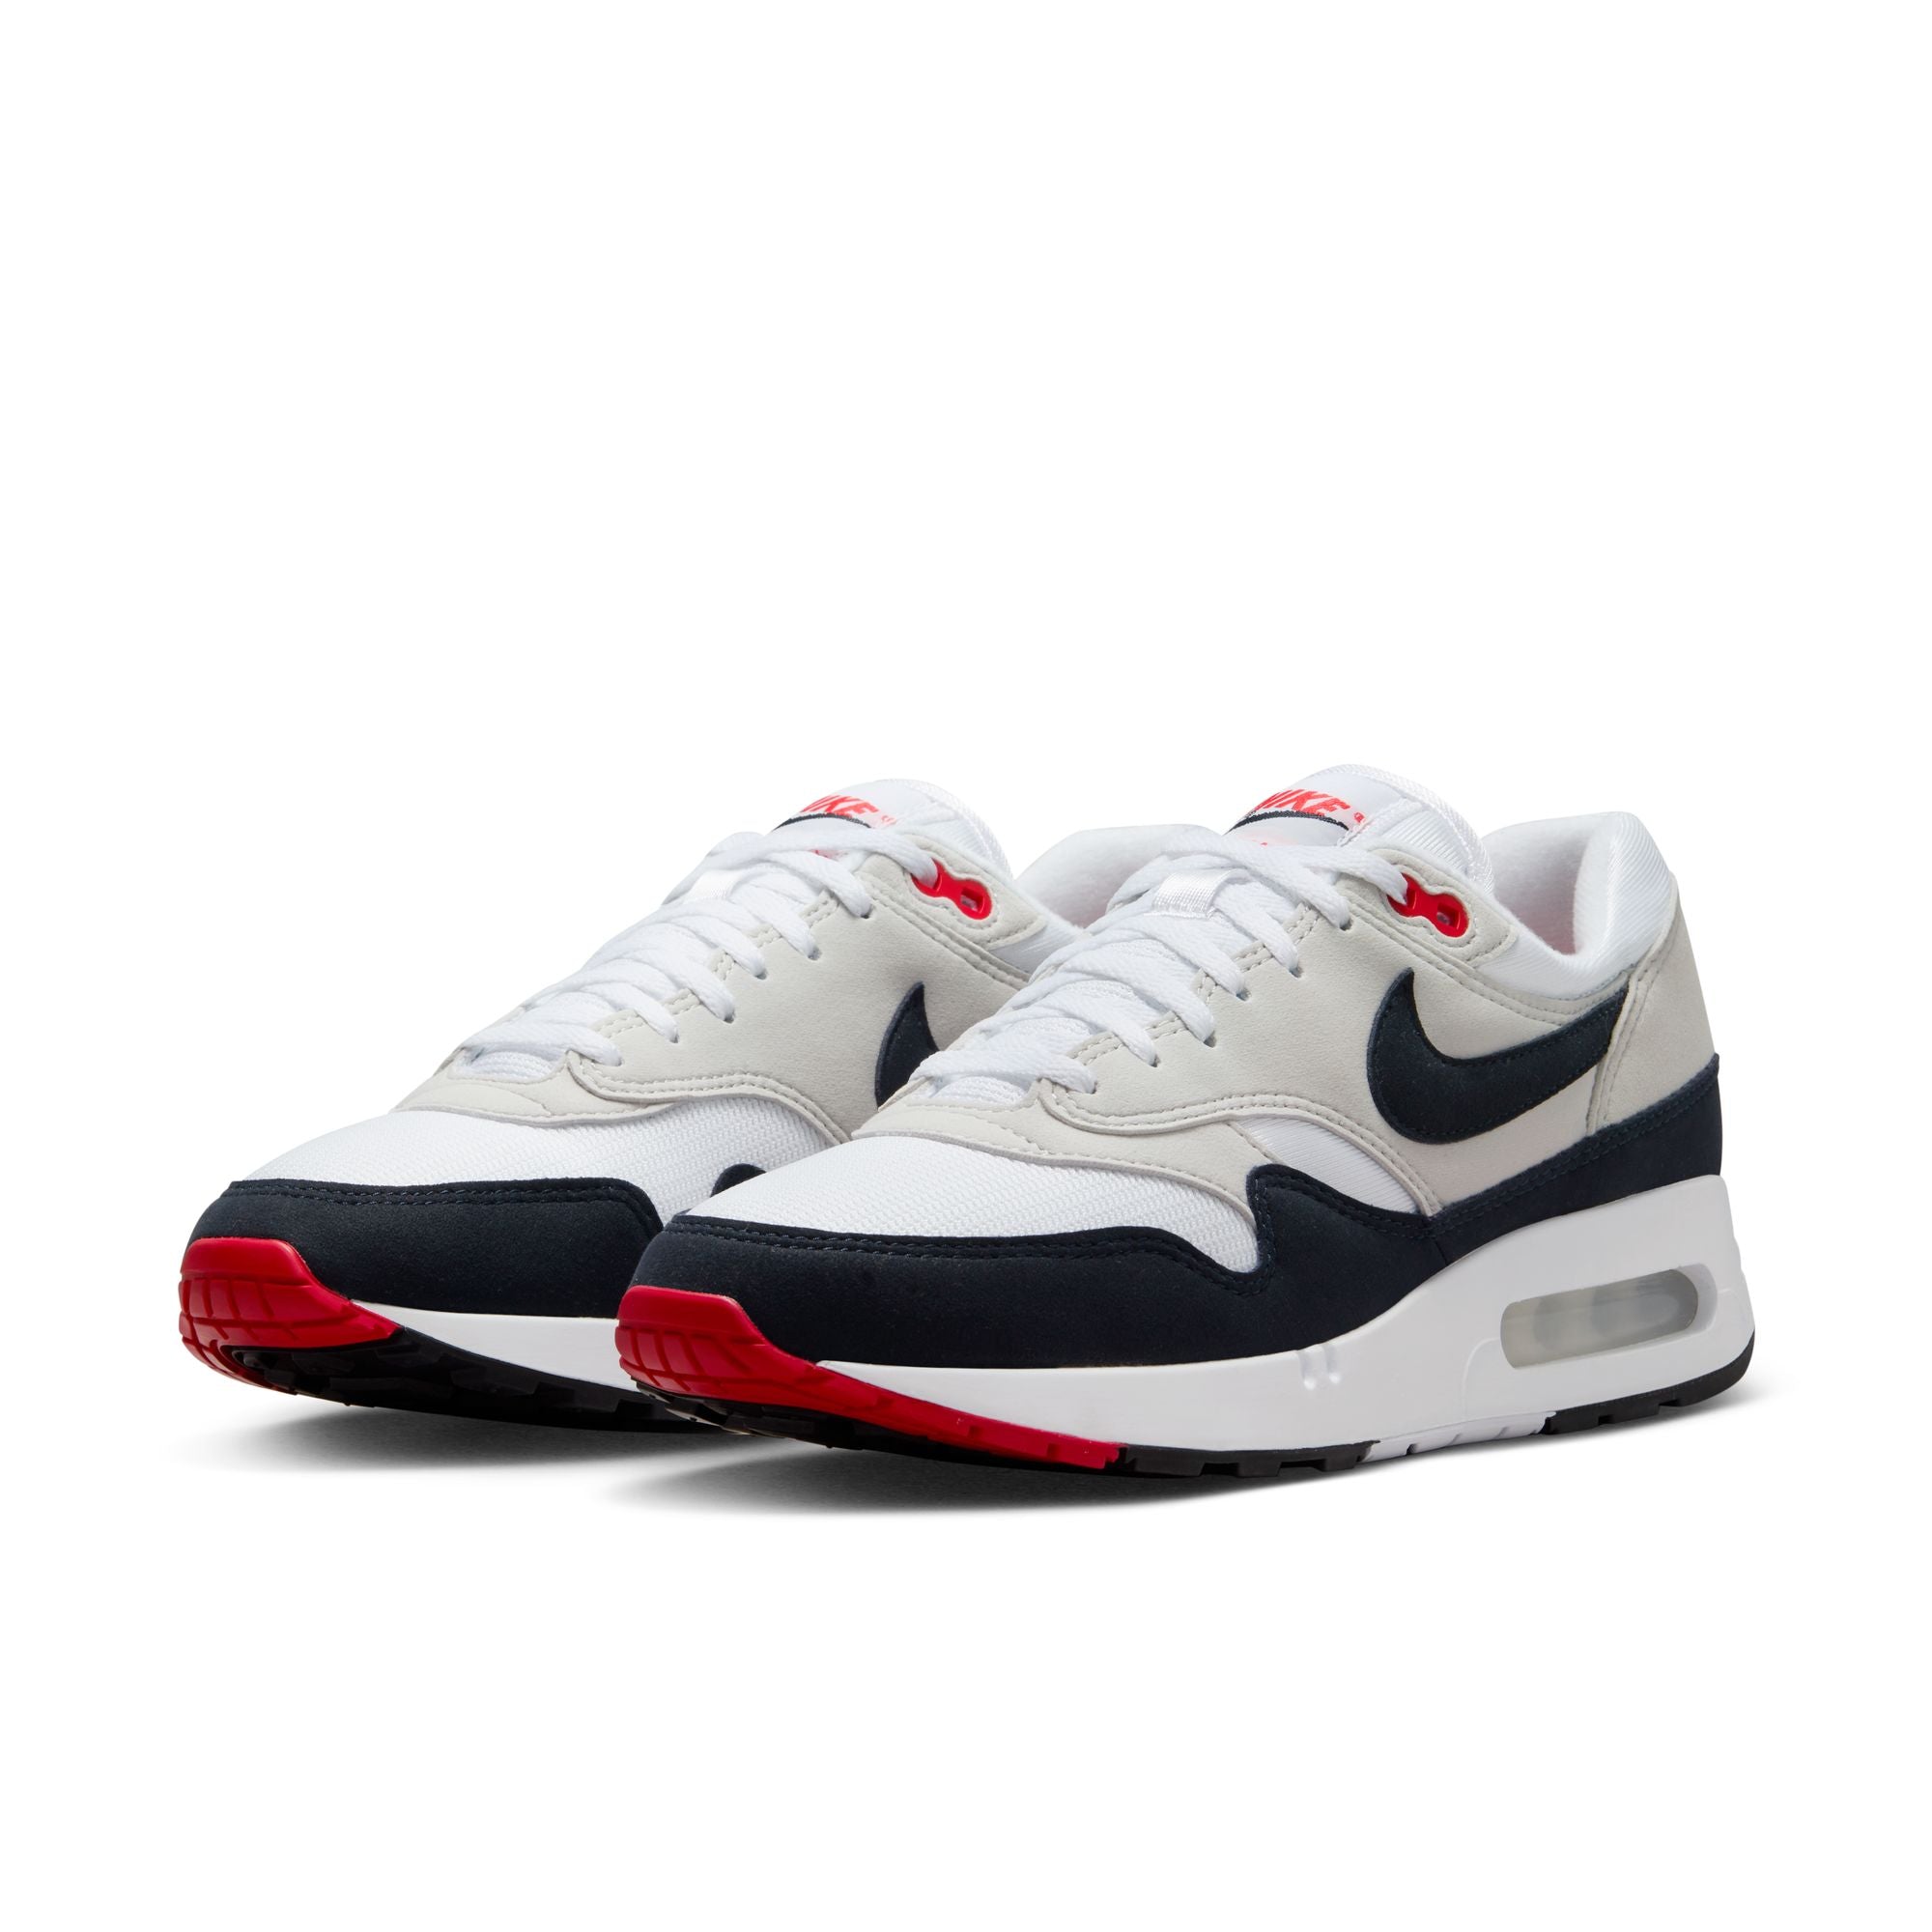 Nike Air Max 1 '87 Obsidian Gorge Green On Foot Sneaker Review